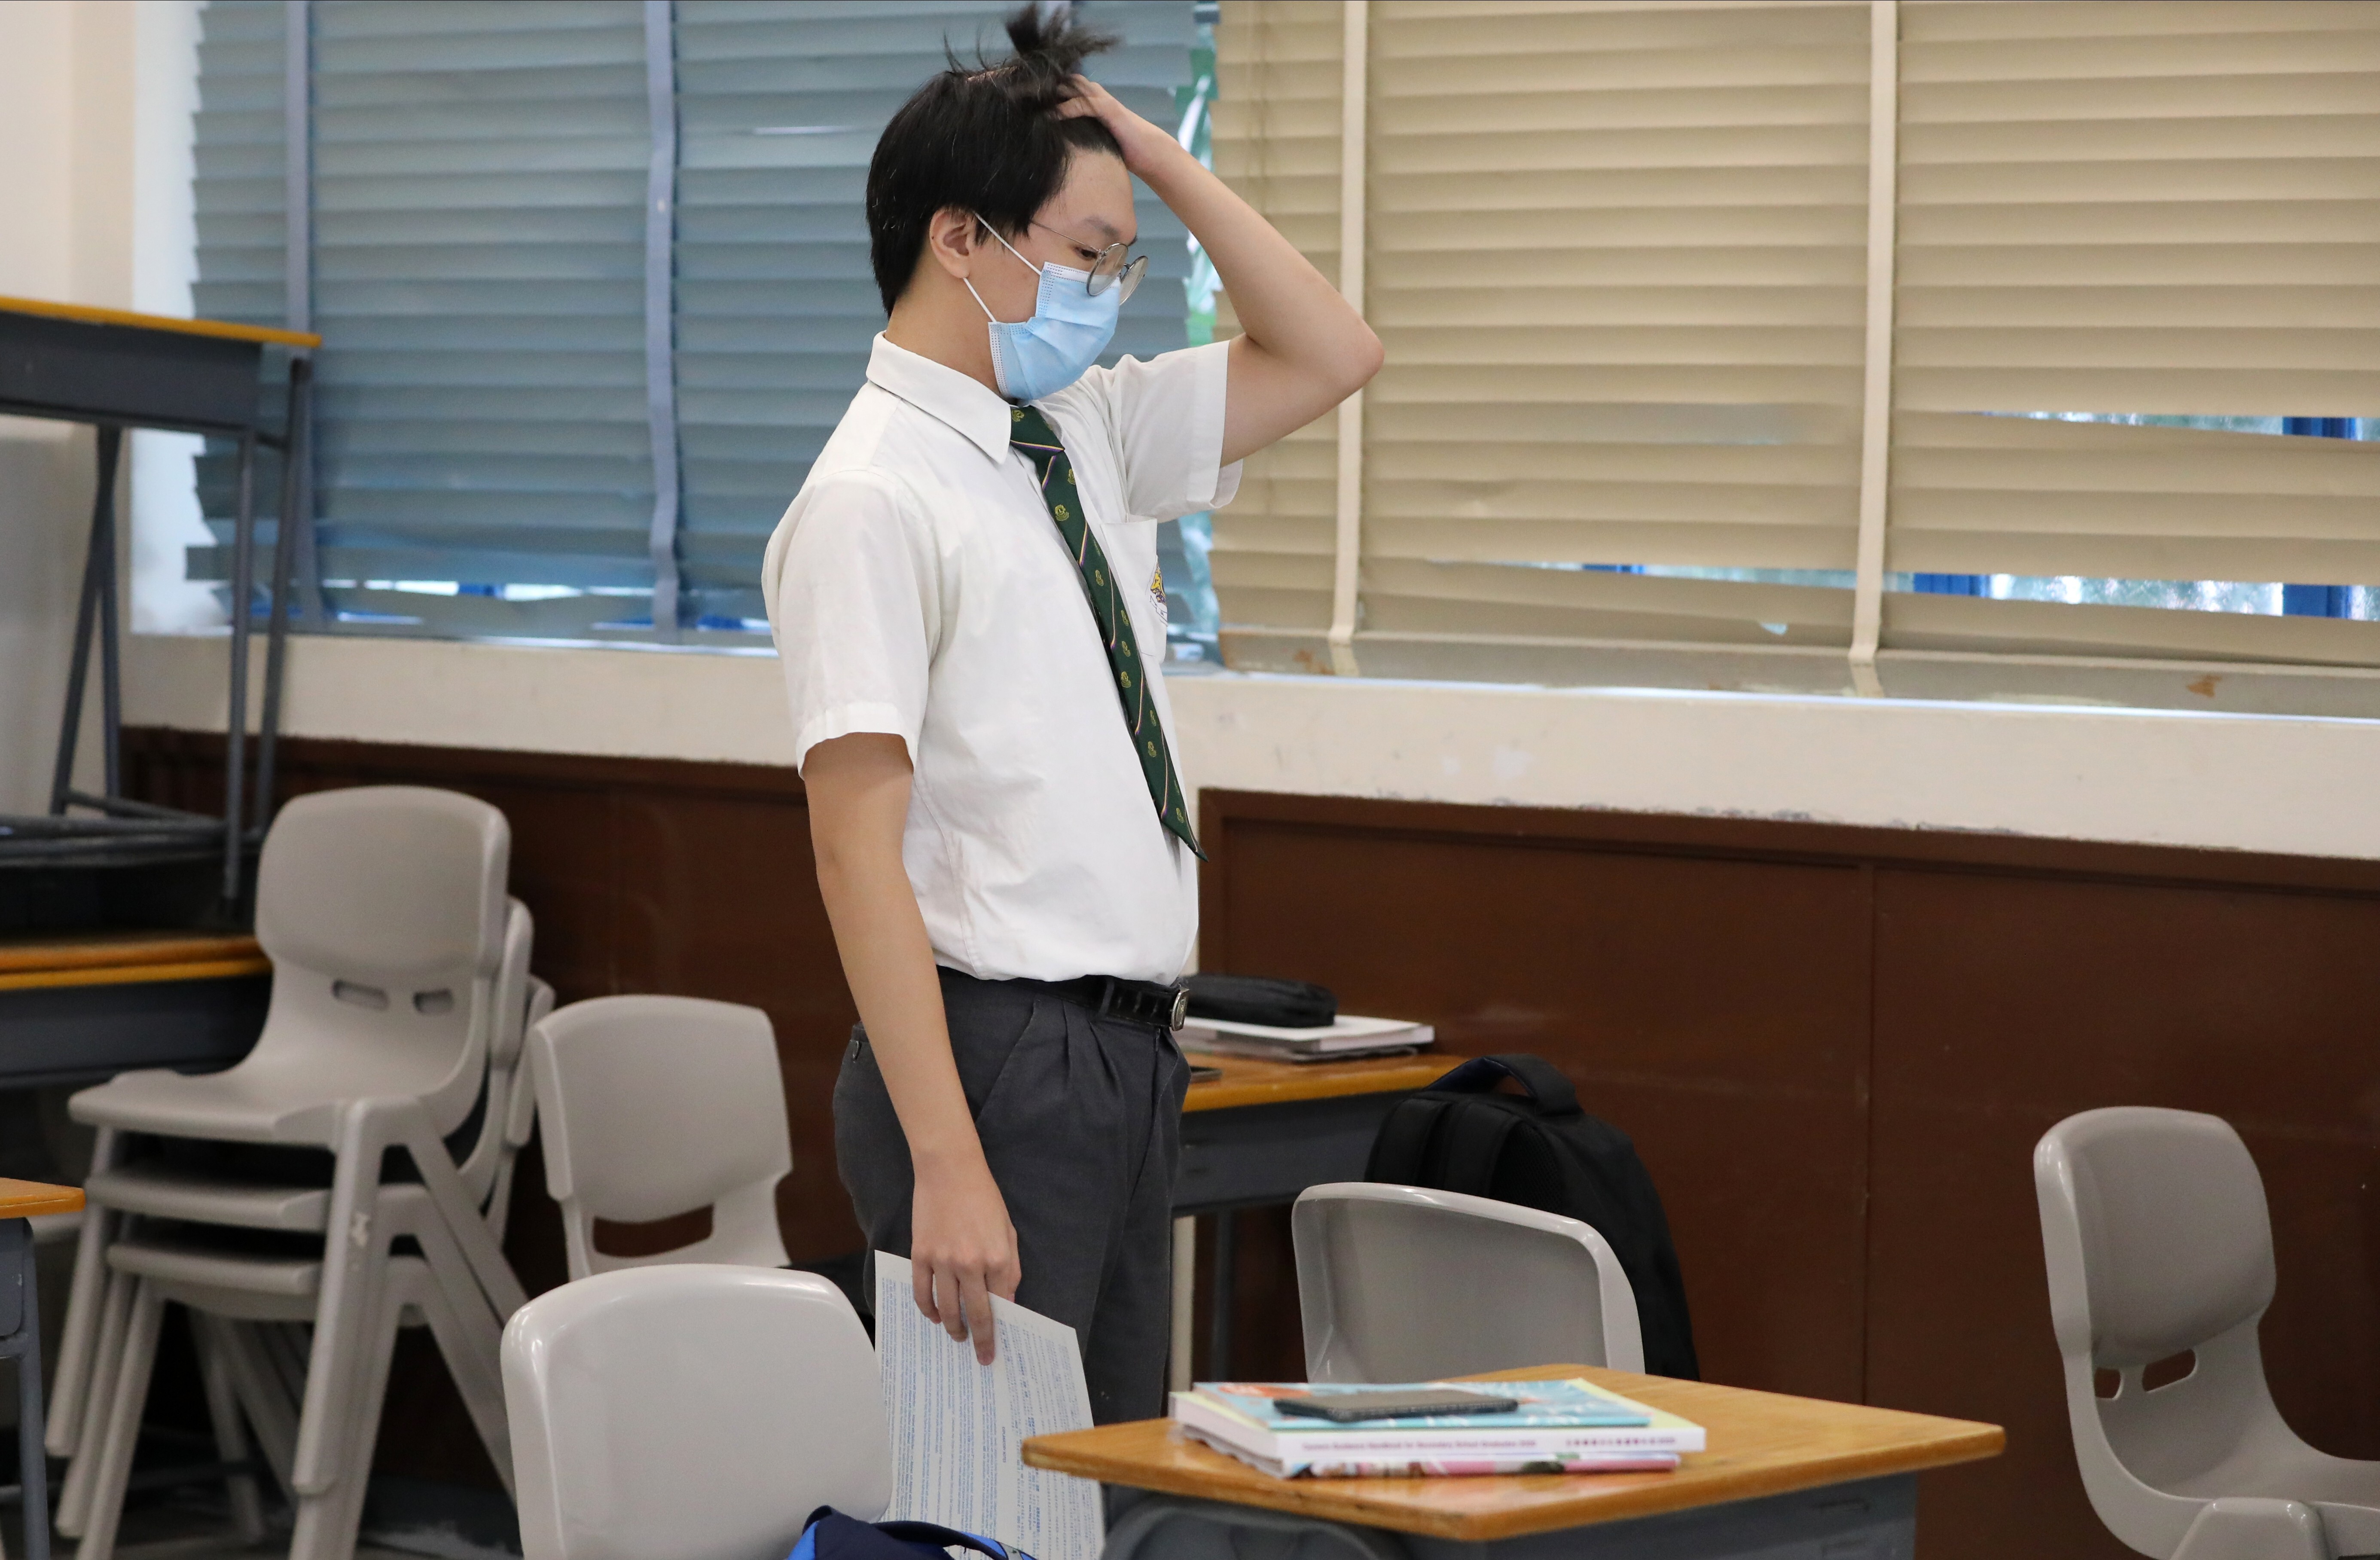 Students who found their Jupas results to be disappointing may get a better result the second time around. Photo: SCMP / May Tse